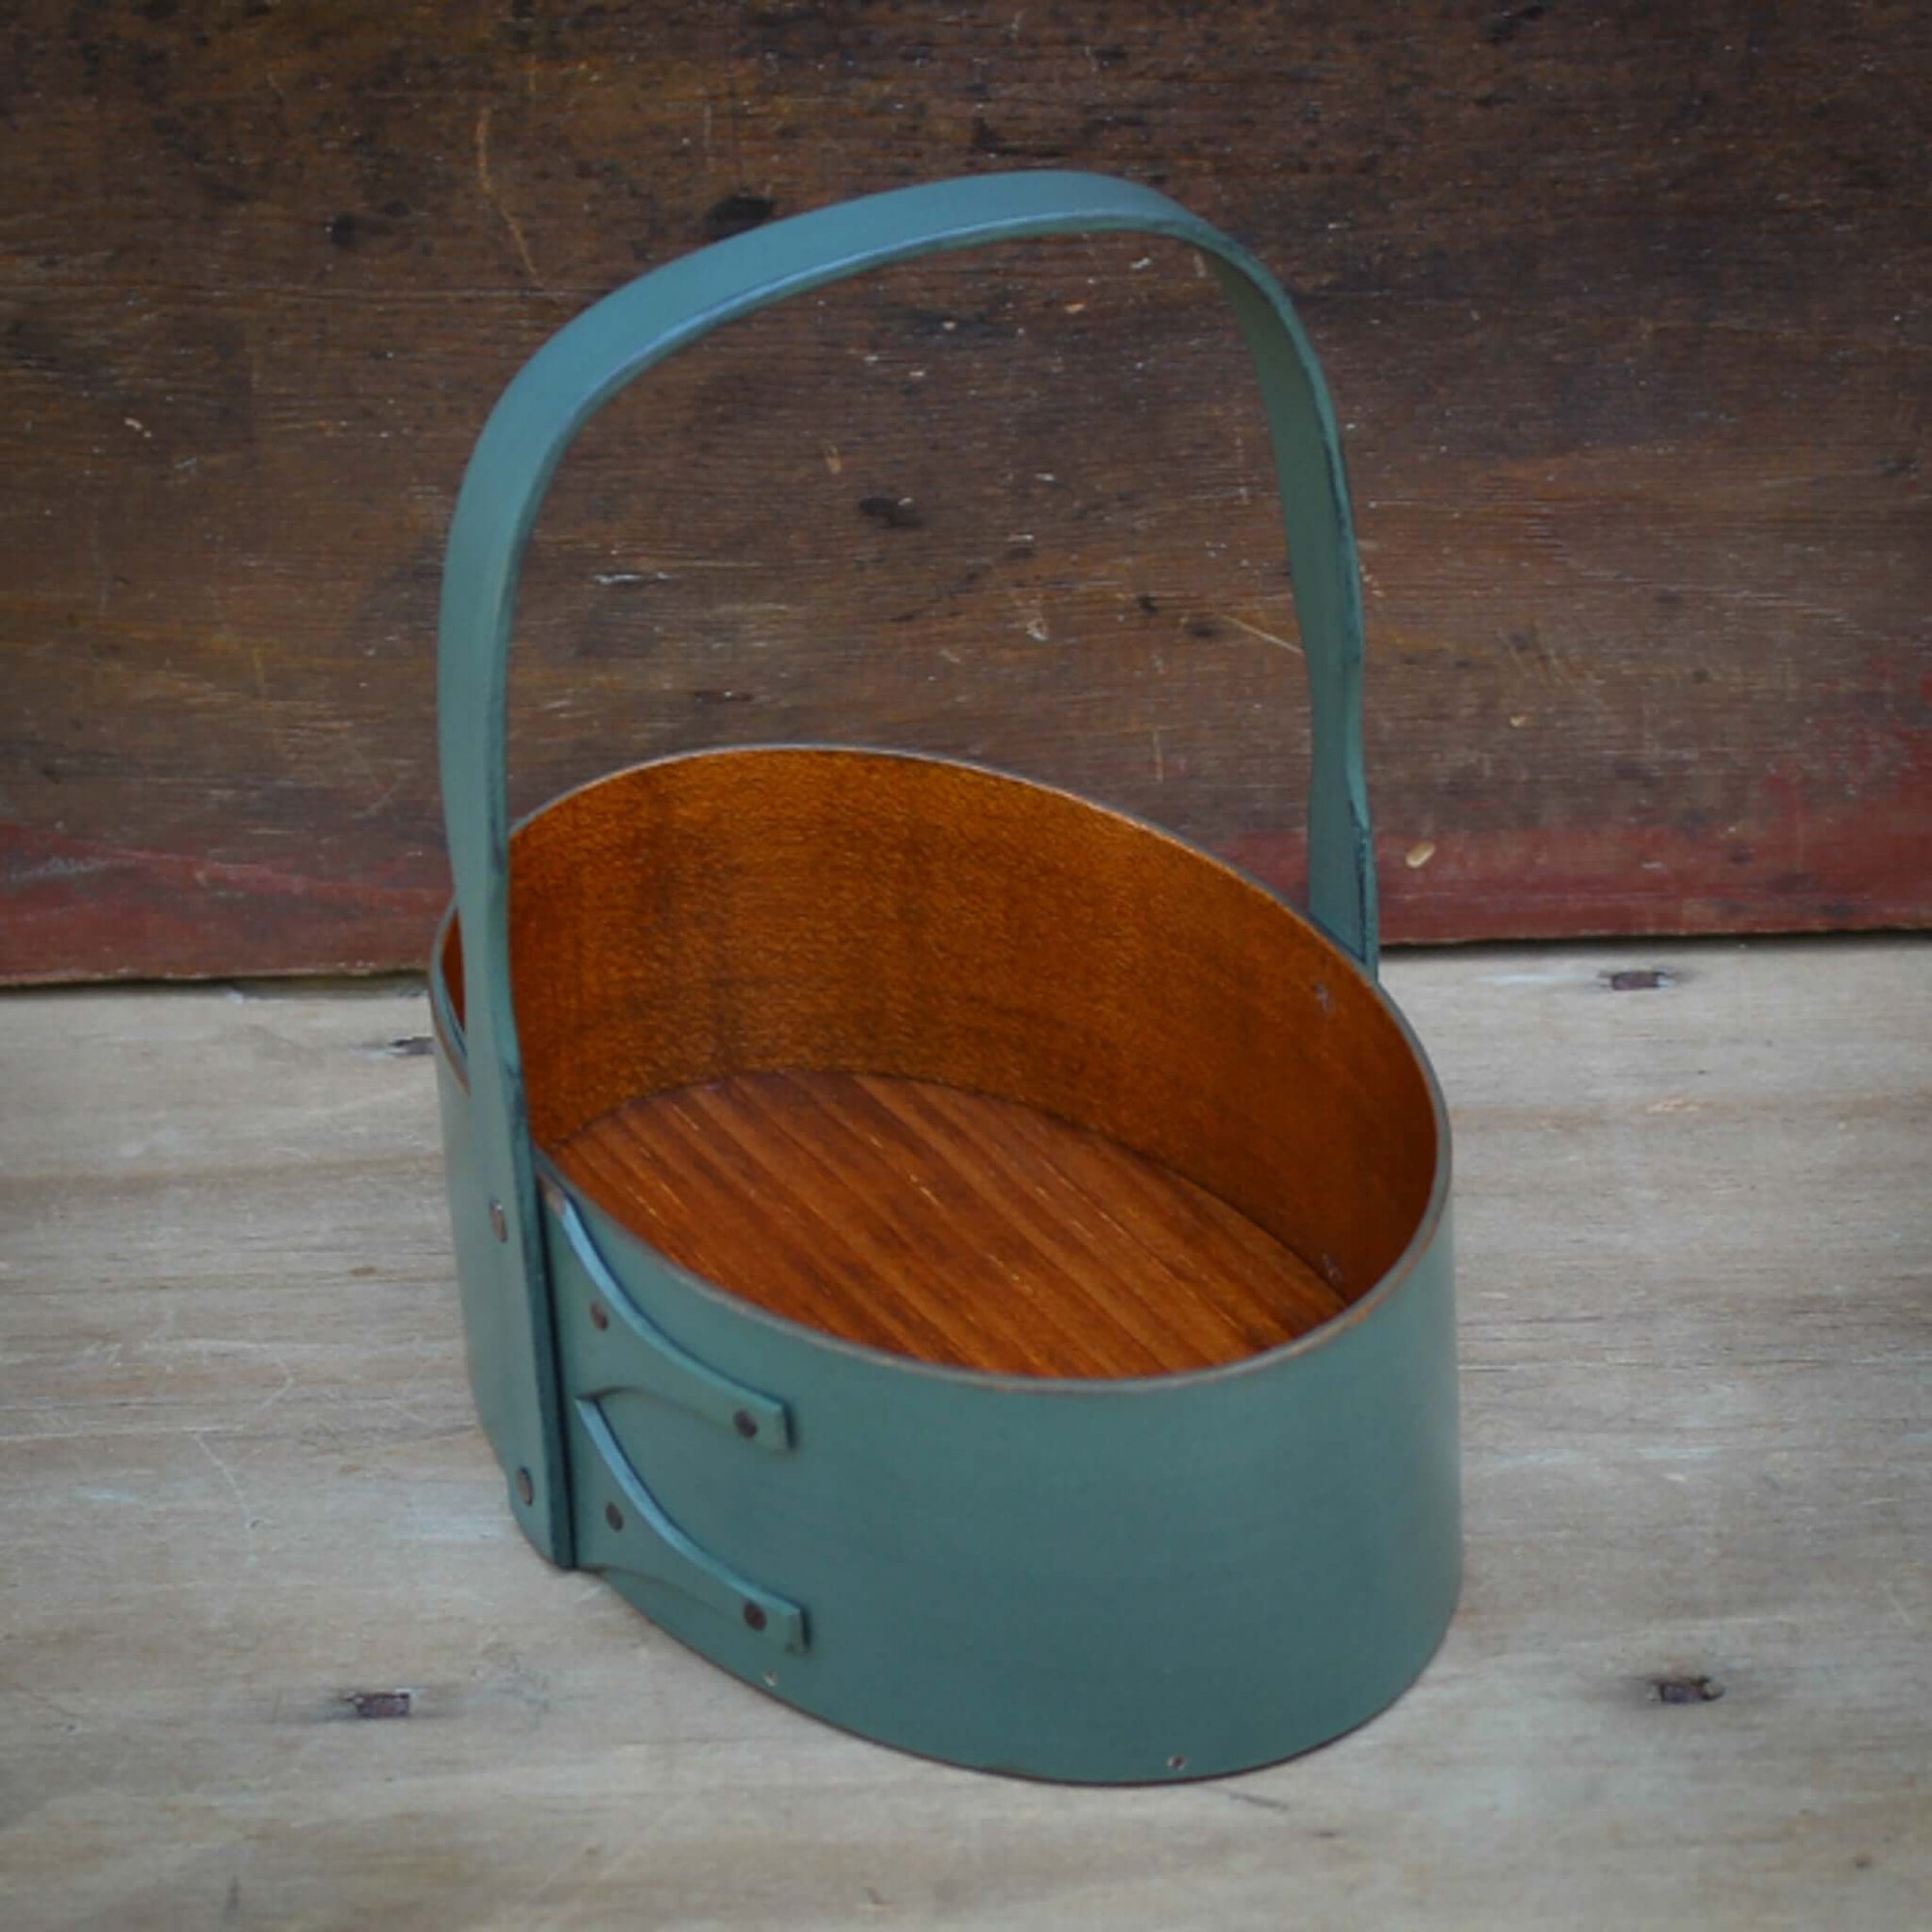 Shaker Oval Carrier, LeHay's Shaker Boxes